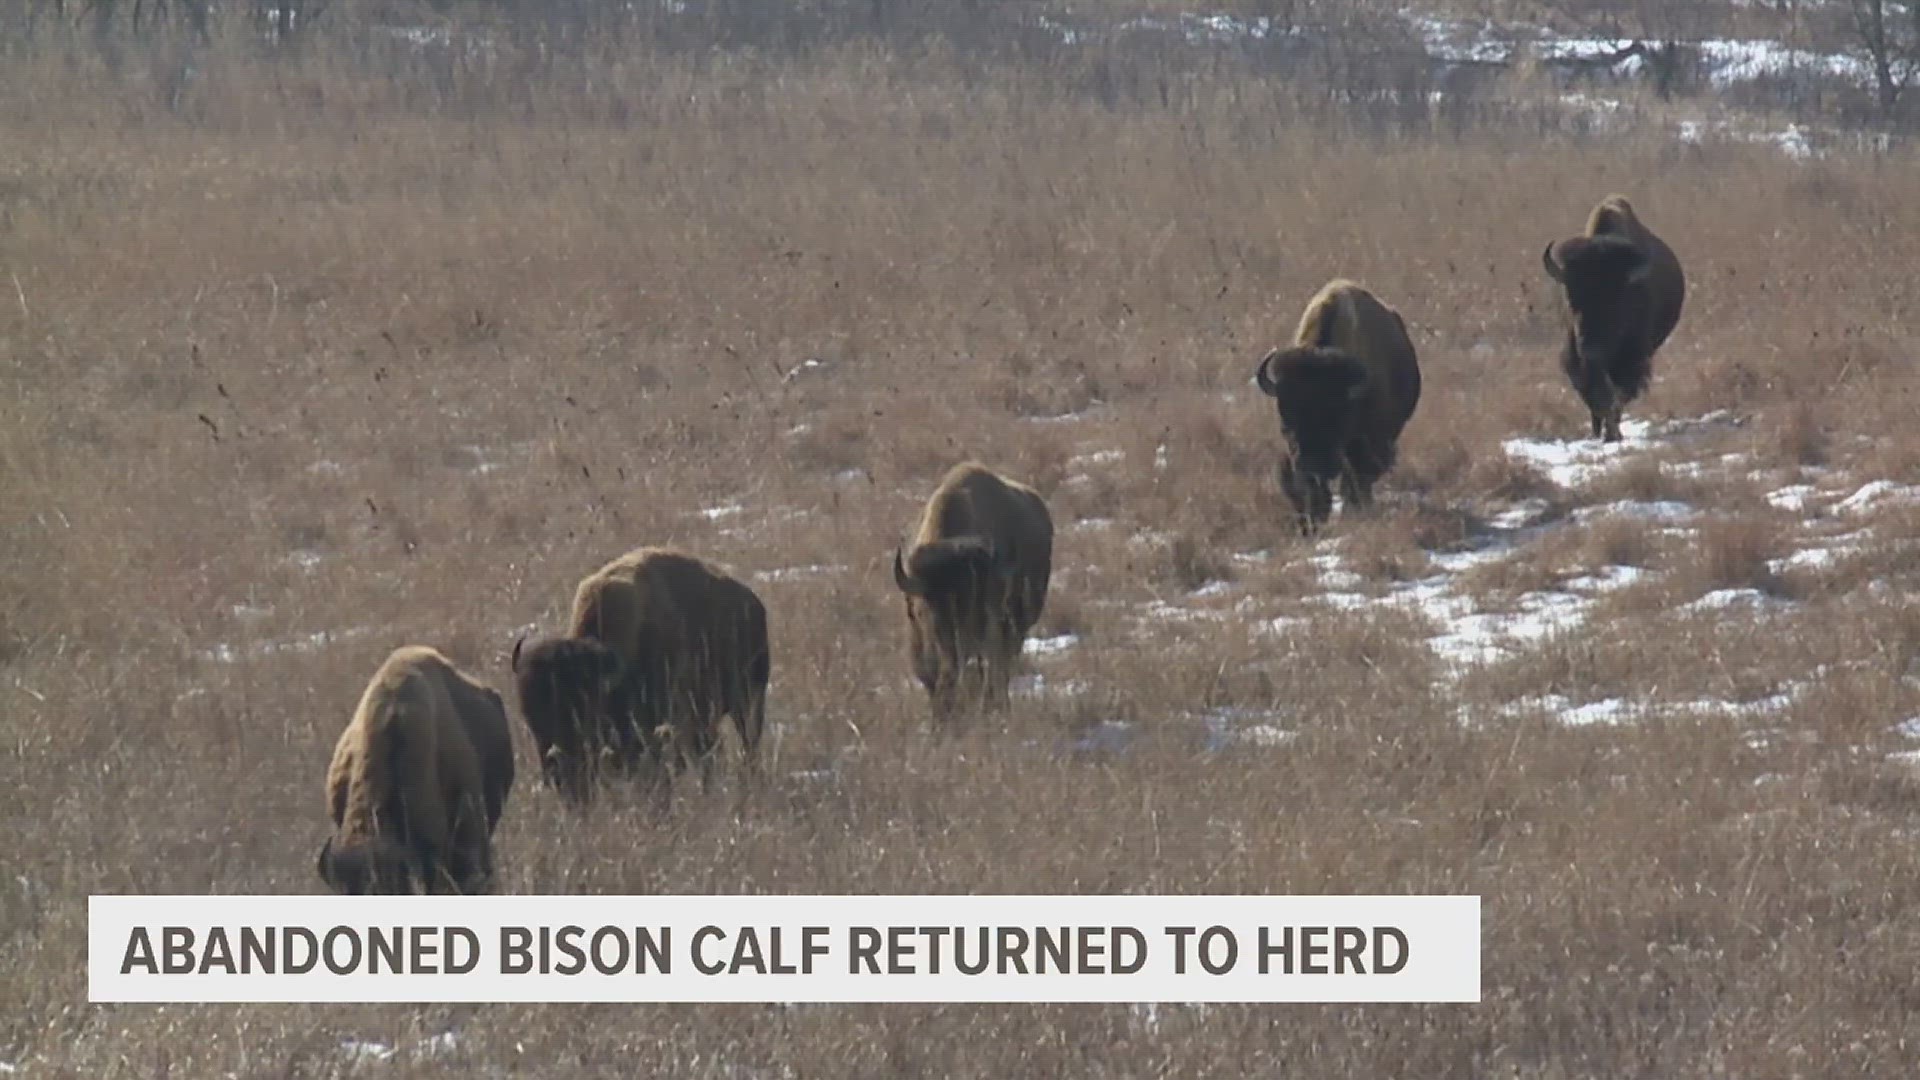 An abandoned bison calf is back with their herd at the Neil Smith National Wildlife Refuge in Central Iowa.